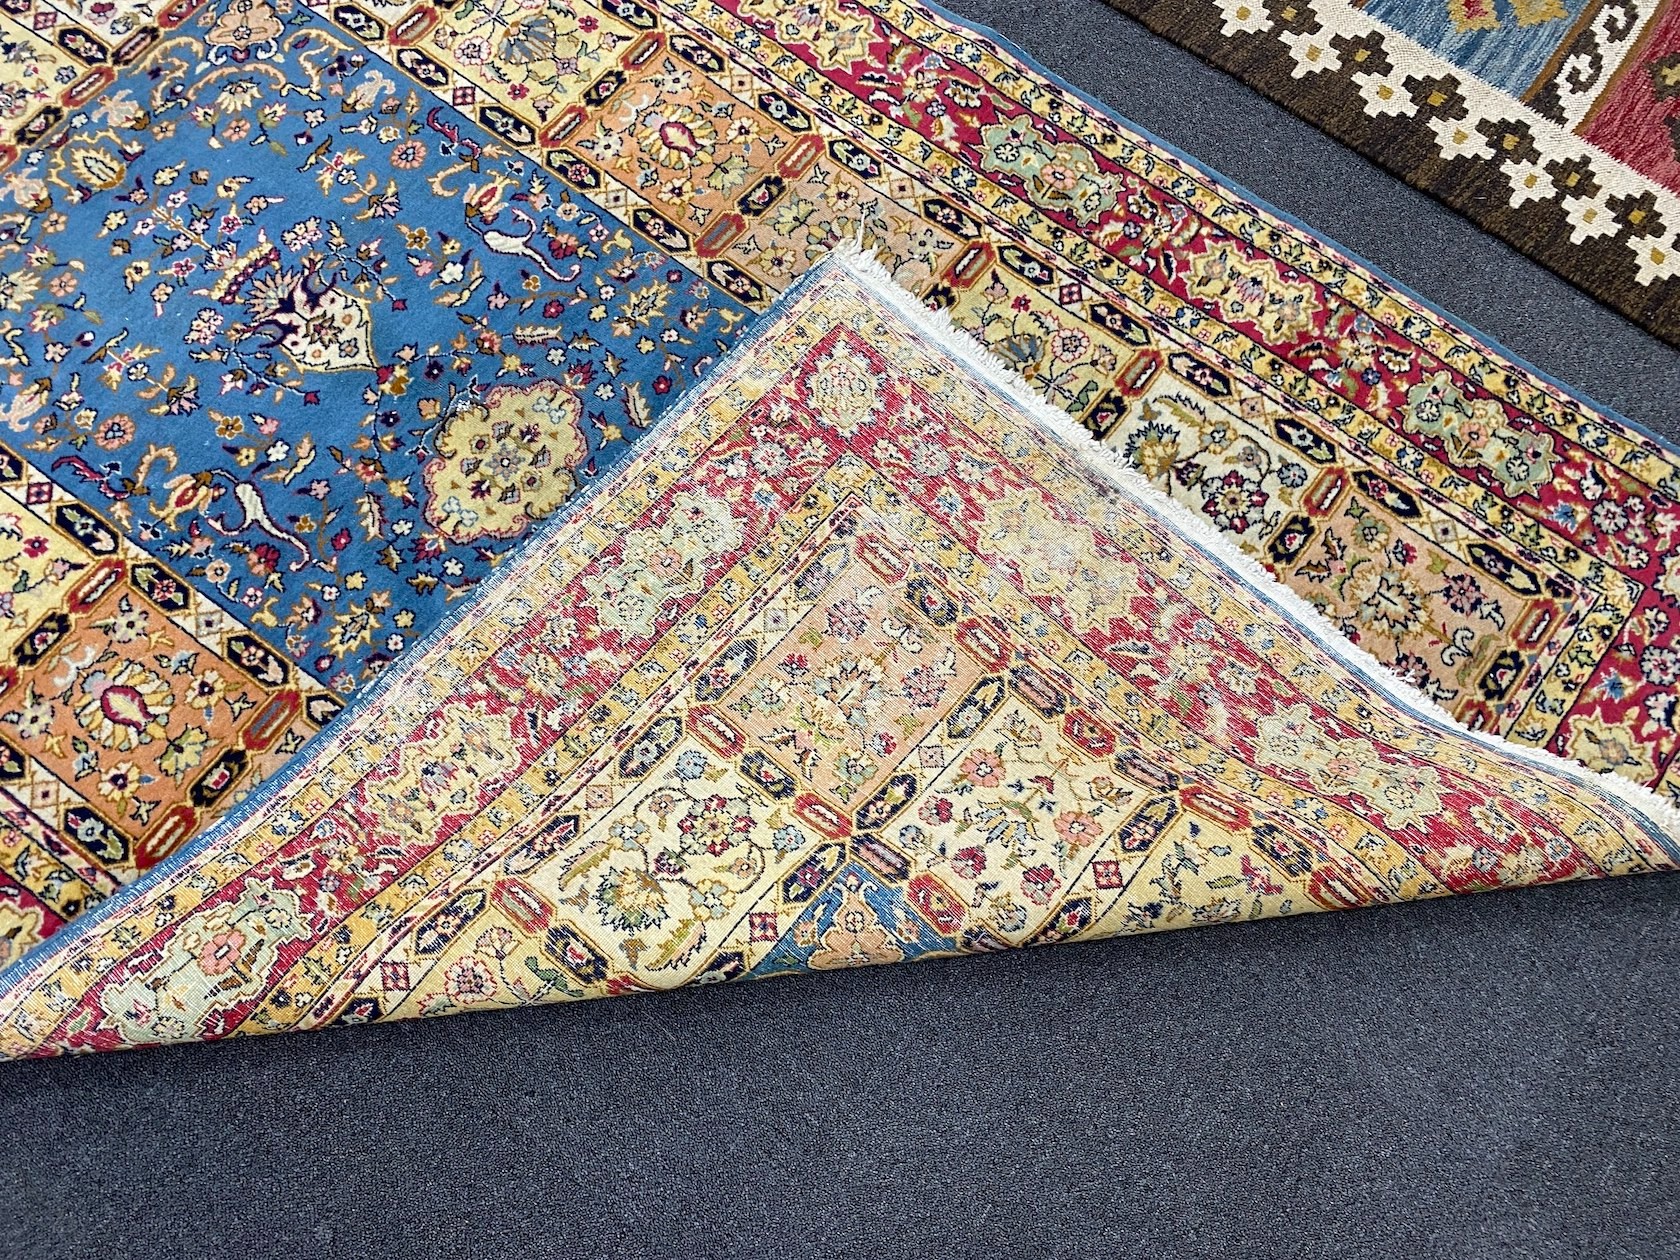 A North West Persian blue ground rug, 234 x 154cm